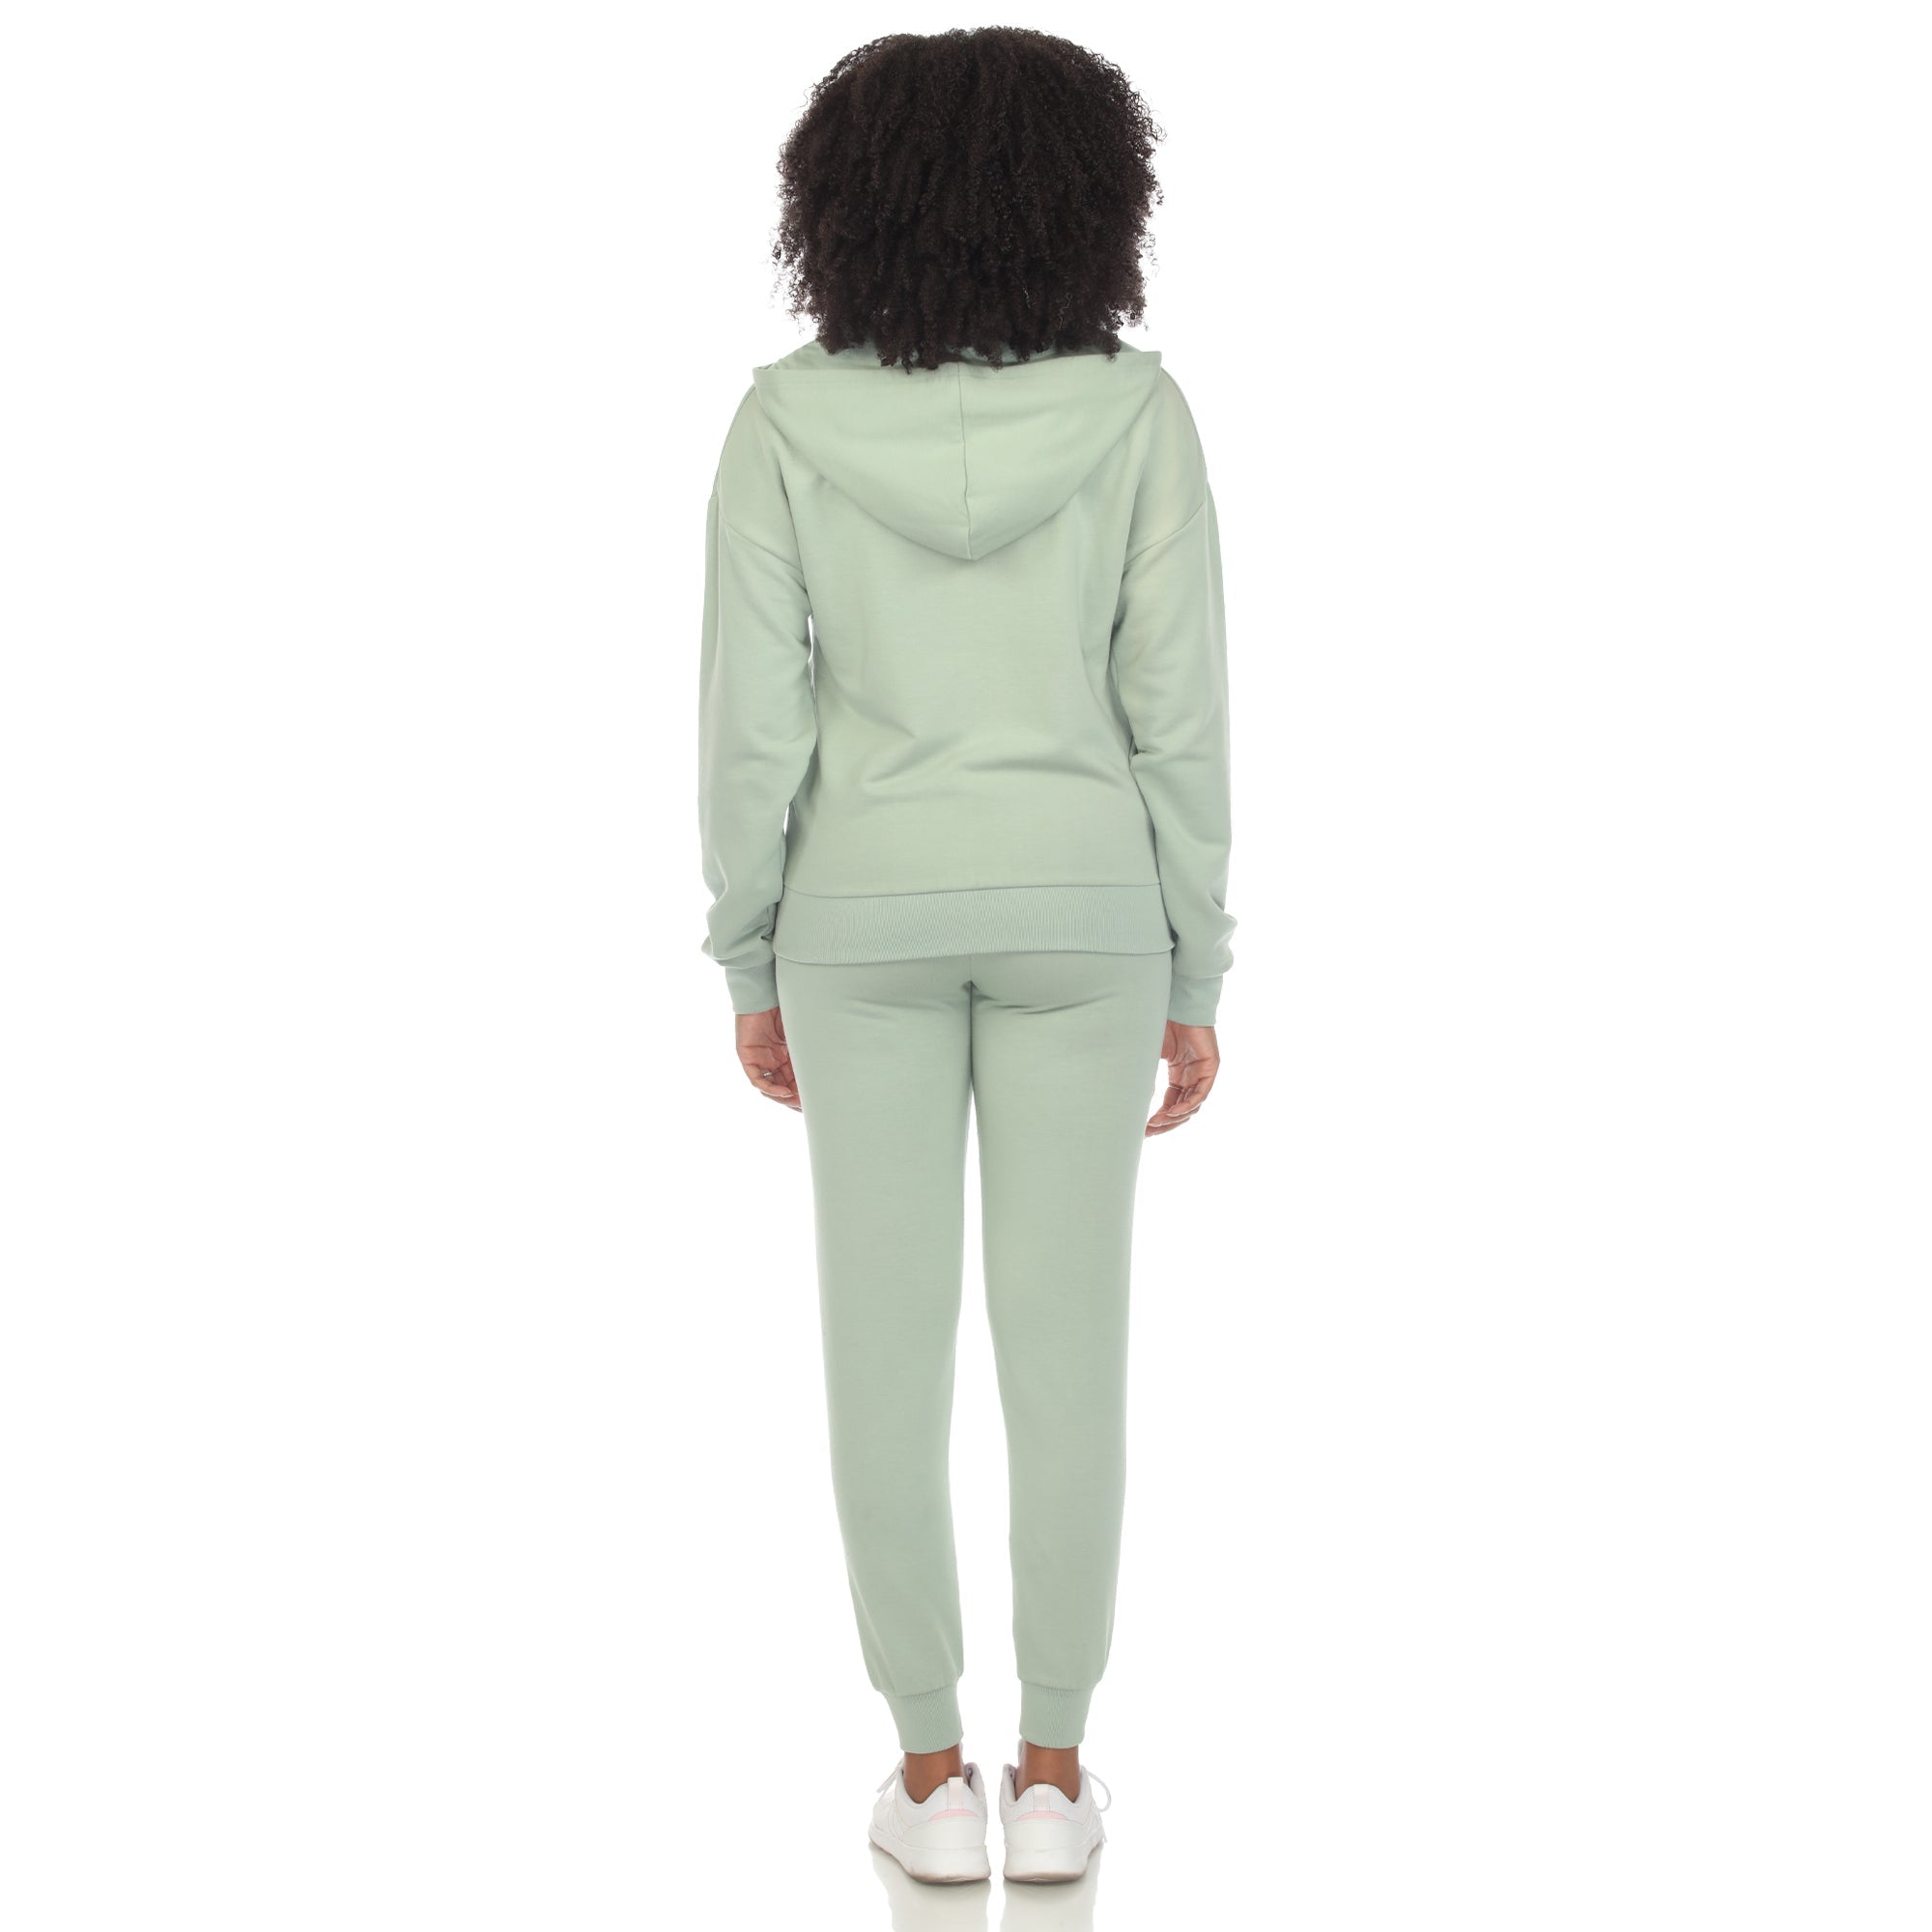 Pembrook Womens Sweat Suits Two-Piece - Ladies Sweatsuits Sets, Embroidered Fleece Sets for Women 2 Piece